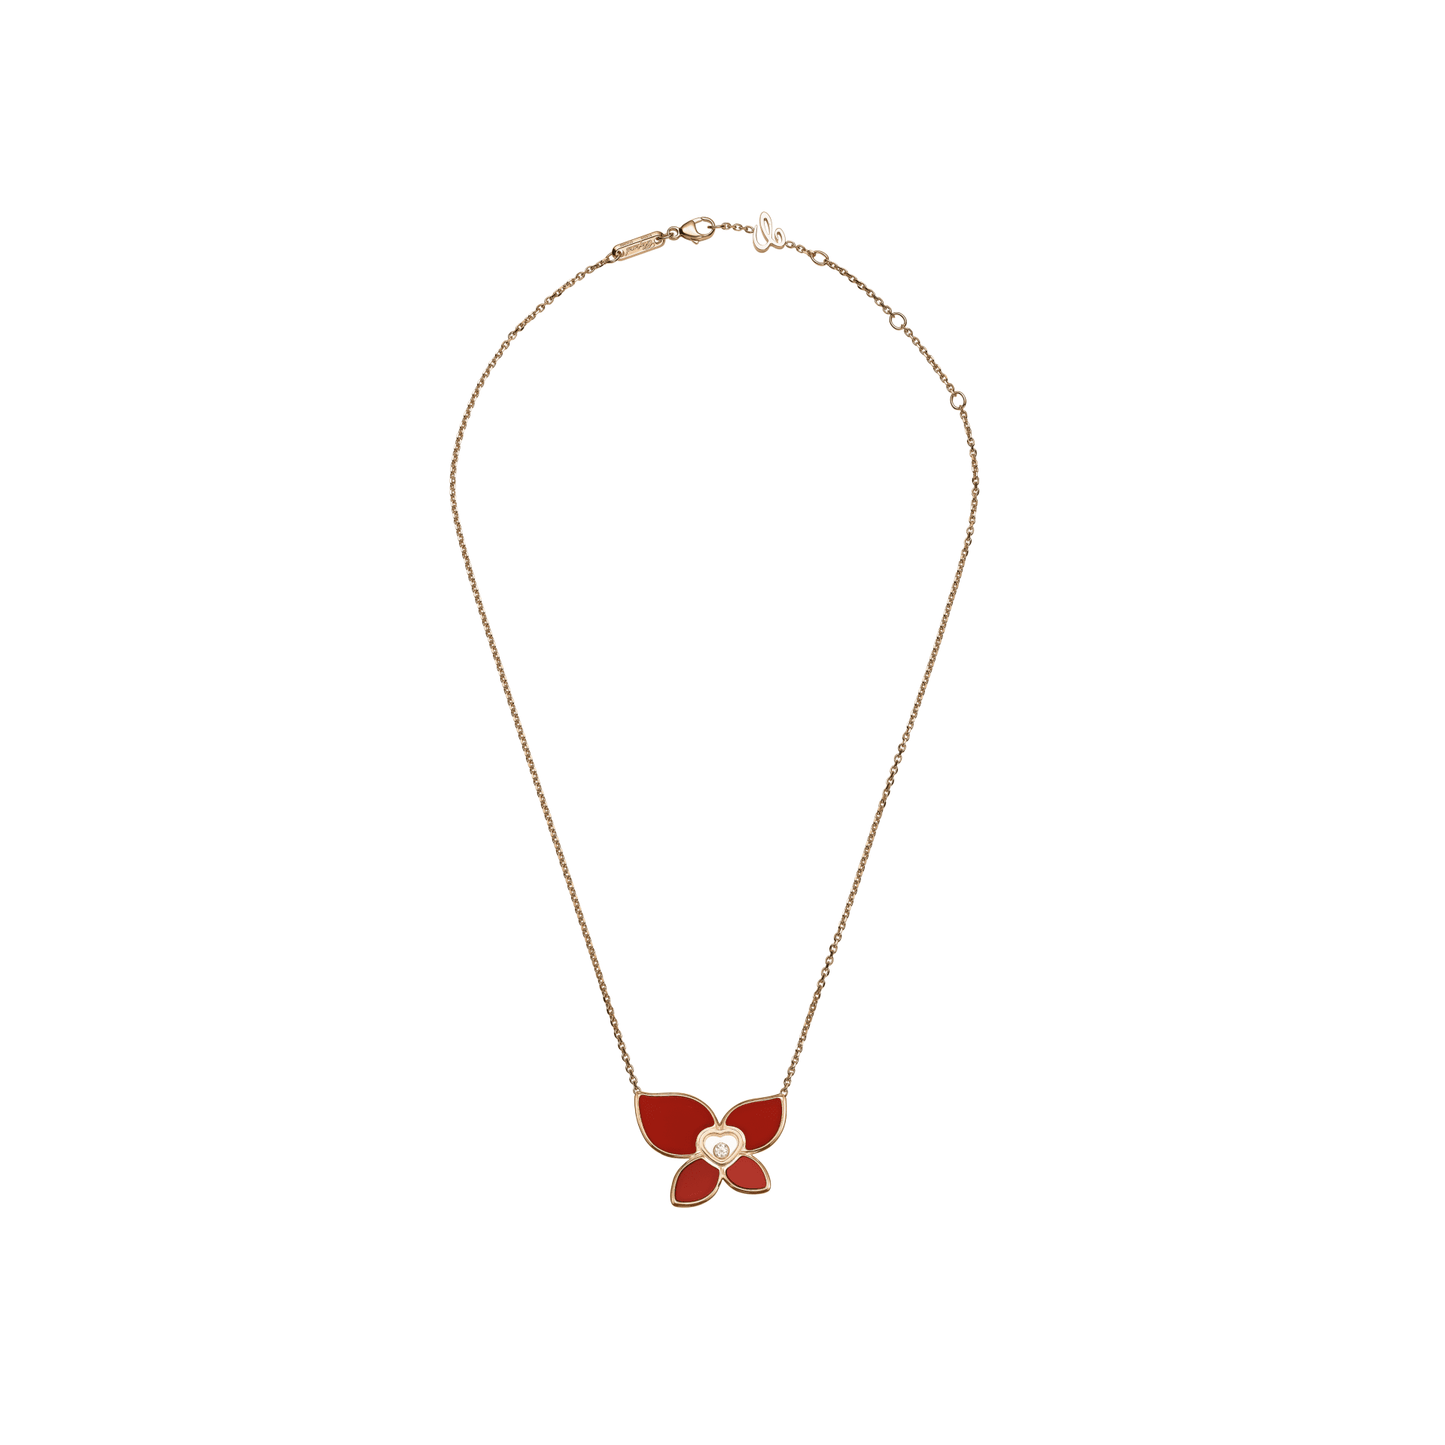 HAPPY BUTTERFLY X MARIAH CAREY NECKLACE, ETHICAL ROSE GOLD, DIAMOND, CARNELIAN 818599-5001